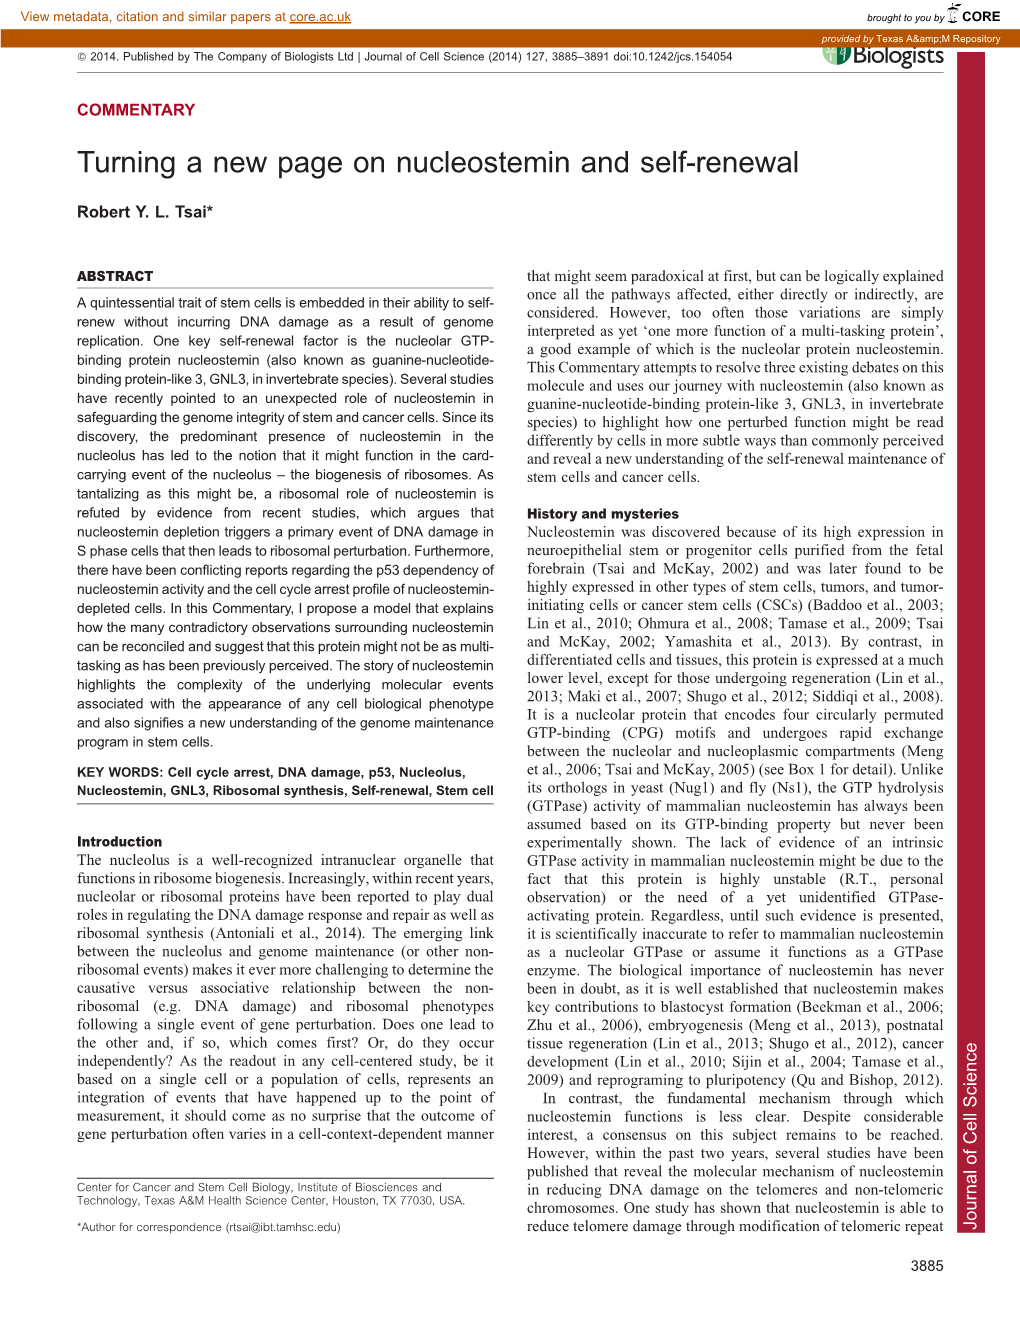 Turning a New Page on Nucleostemin and Self-Renewal